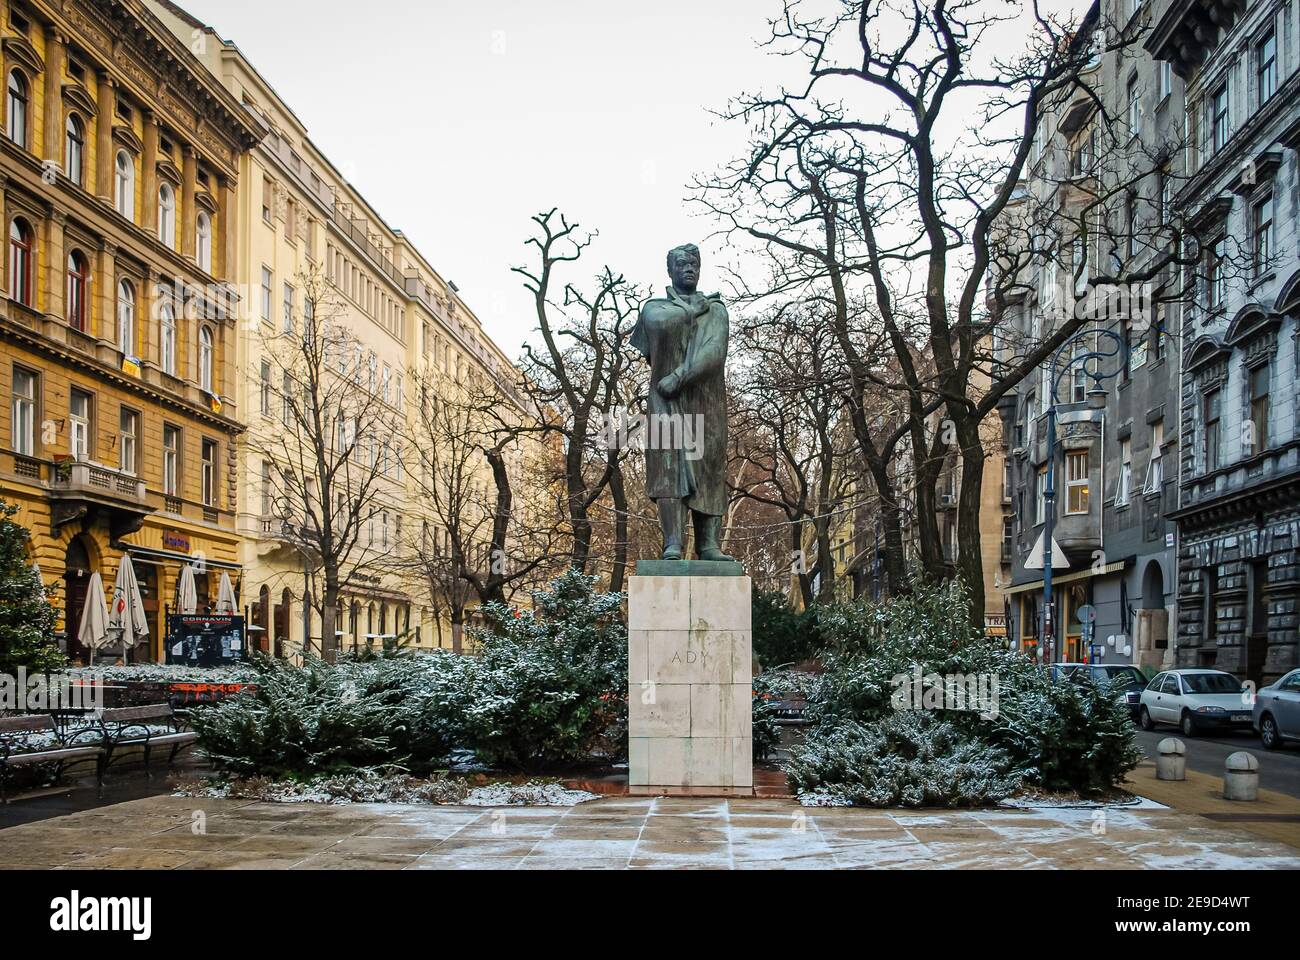 Statue of Ady Endre, Budapest, Hungary Stock Photo